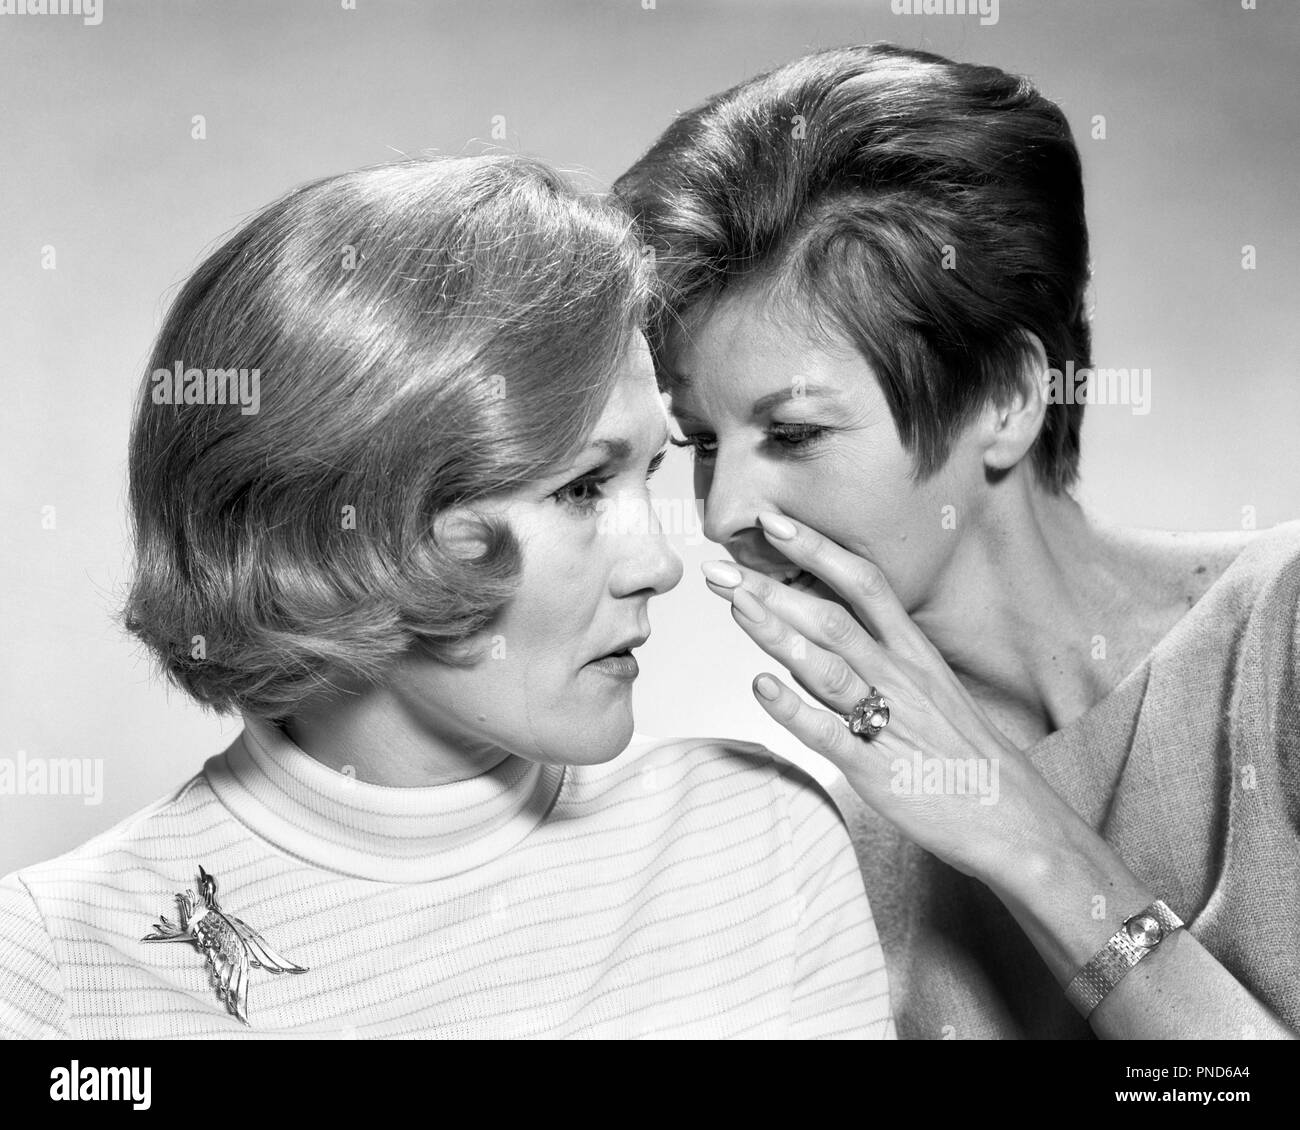 1960s 1970s TWO WOMEN SHARING SECRET AND GOSSIP ONE WHISPERING BEHIND HAND AND IN EAR OF OTHER  - s16701 HAR001 HARS FEMALES GOSSIP STUDIO SHOT HOME LIFE COMMUNICATING COPY SPACE FRIENDSHIP LADIES PERSONS CONFIDENCE SHARE GOSSIPING B&W TEMPTATION HEAD AND SHOULDERS STYLES NETWORKING EXCITEMENT KNOWLEDGE TELLING IN WHISPERS CONNECTION HAIRSTYLES RUMOR STYLISH ENTRE NOUS FASHIONS MID-ADULT MID-ADULT WOMAN SECRETS TOGETHERNESS BLACK AND WHITE CAUCASIAN ETHNICITY HAR001 OLD FASHIONED Stock Photo